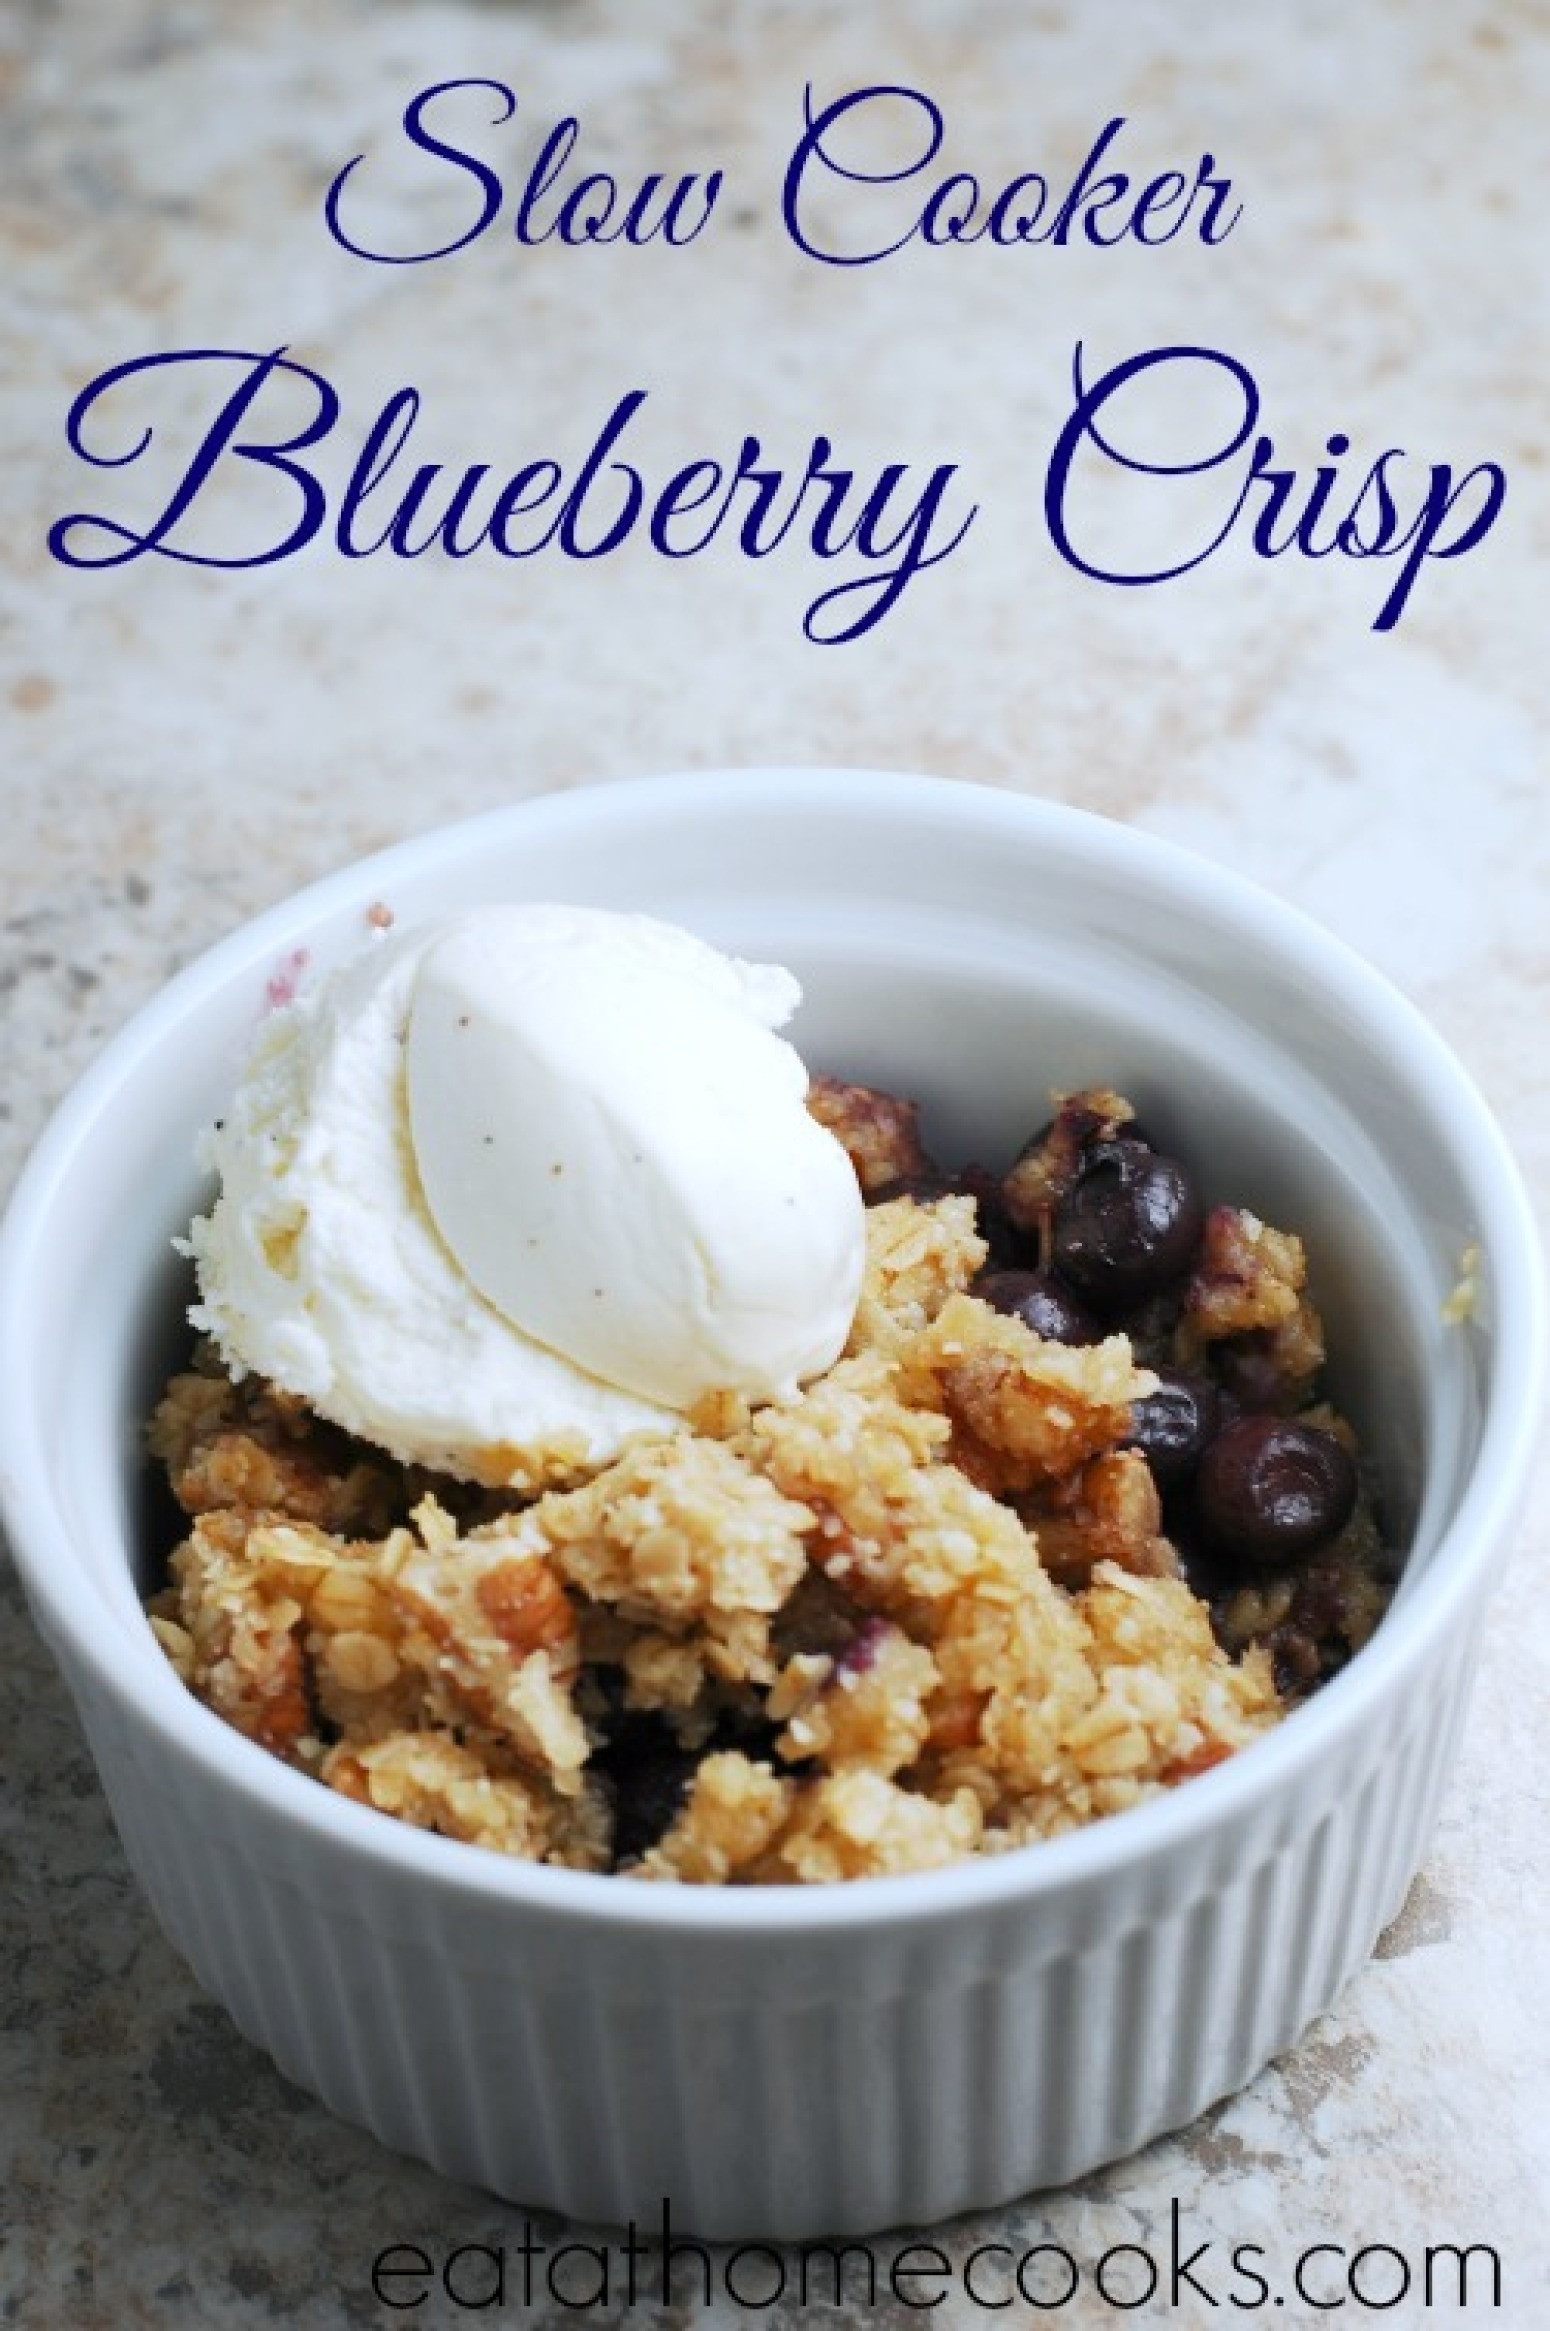 Healthy Blueberry Dessert Recipes
 Slow Cooker Blueberry Crisp – A Healthy Dessert Recipe 2